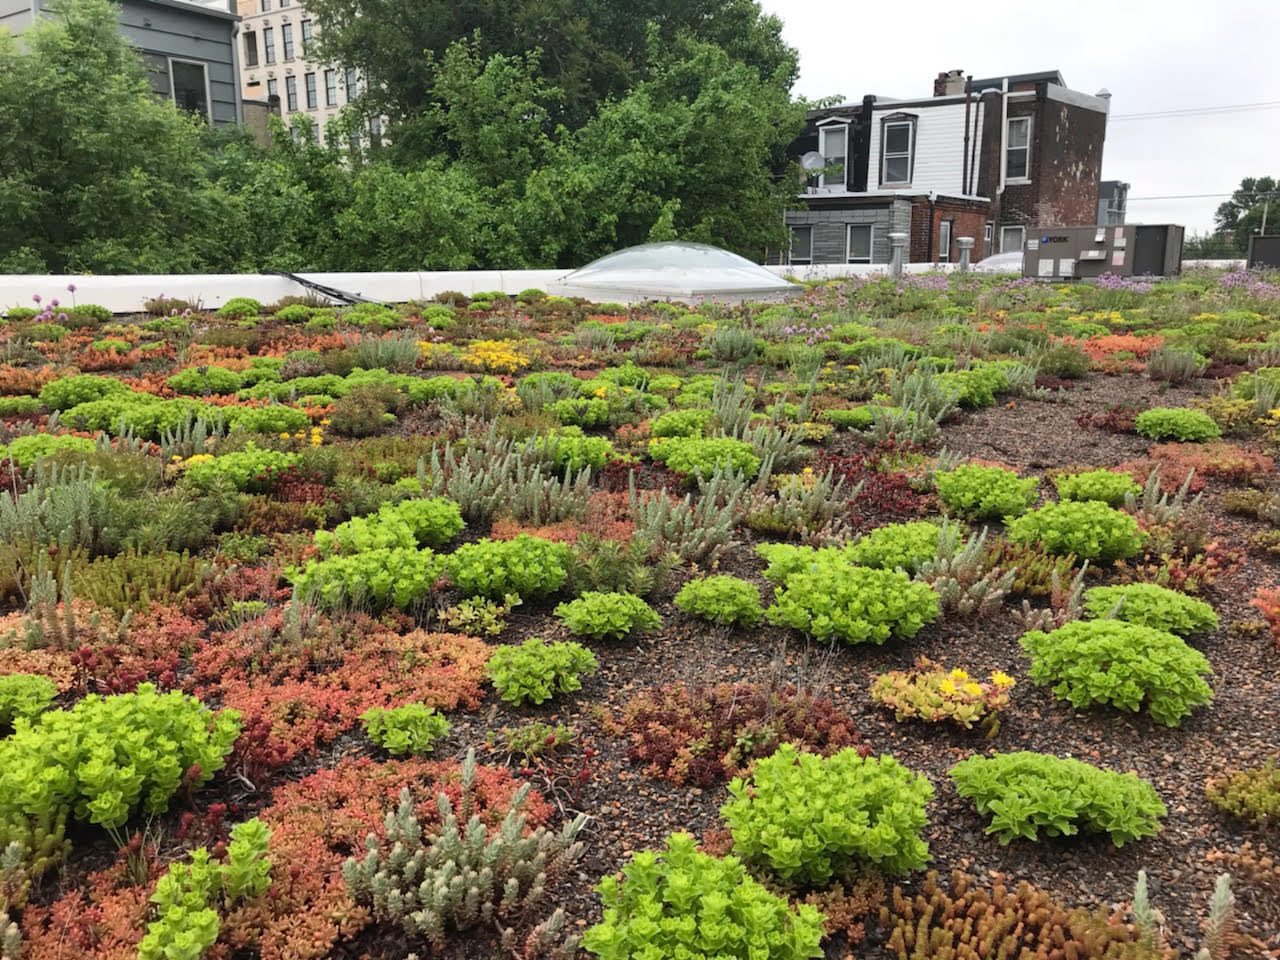 Green roof located above the Indigo Bike Share office. Image courtesy of Philadelphia Green Roofs, LLC.